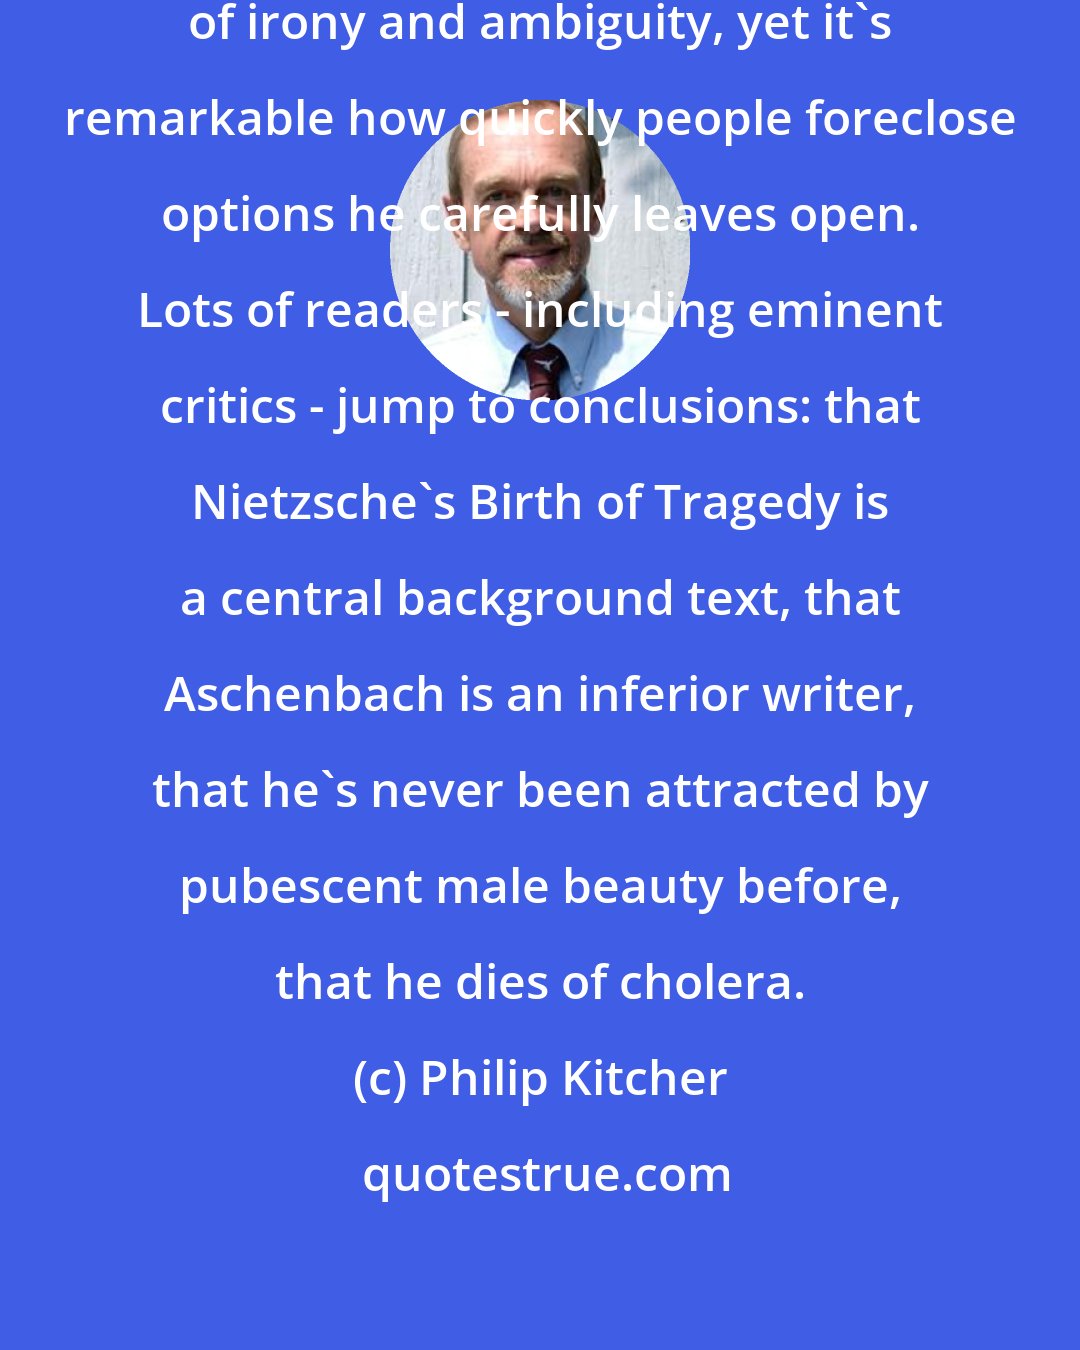 Philip Kitcher: Mann is widely recognized as a master of irony and ambiguity, yet it's remarkable how quickly people foreclose options he carefully leaves open. Lots of readers - including eminent critics - jump to conclusions: that Nietzsche's Birth of Tragedy is a central background text, that Aschenbach is an inferior writer, that he's never been attracted by pubescent male beauty before, that he dies of cholera.